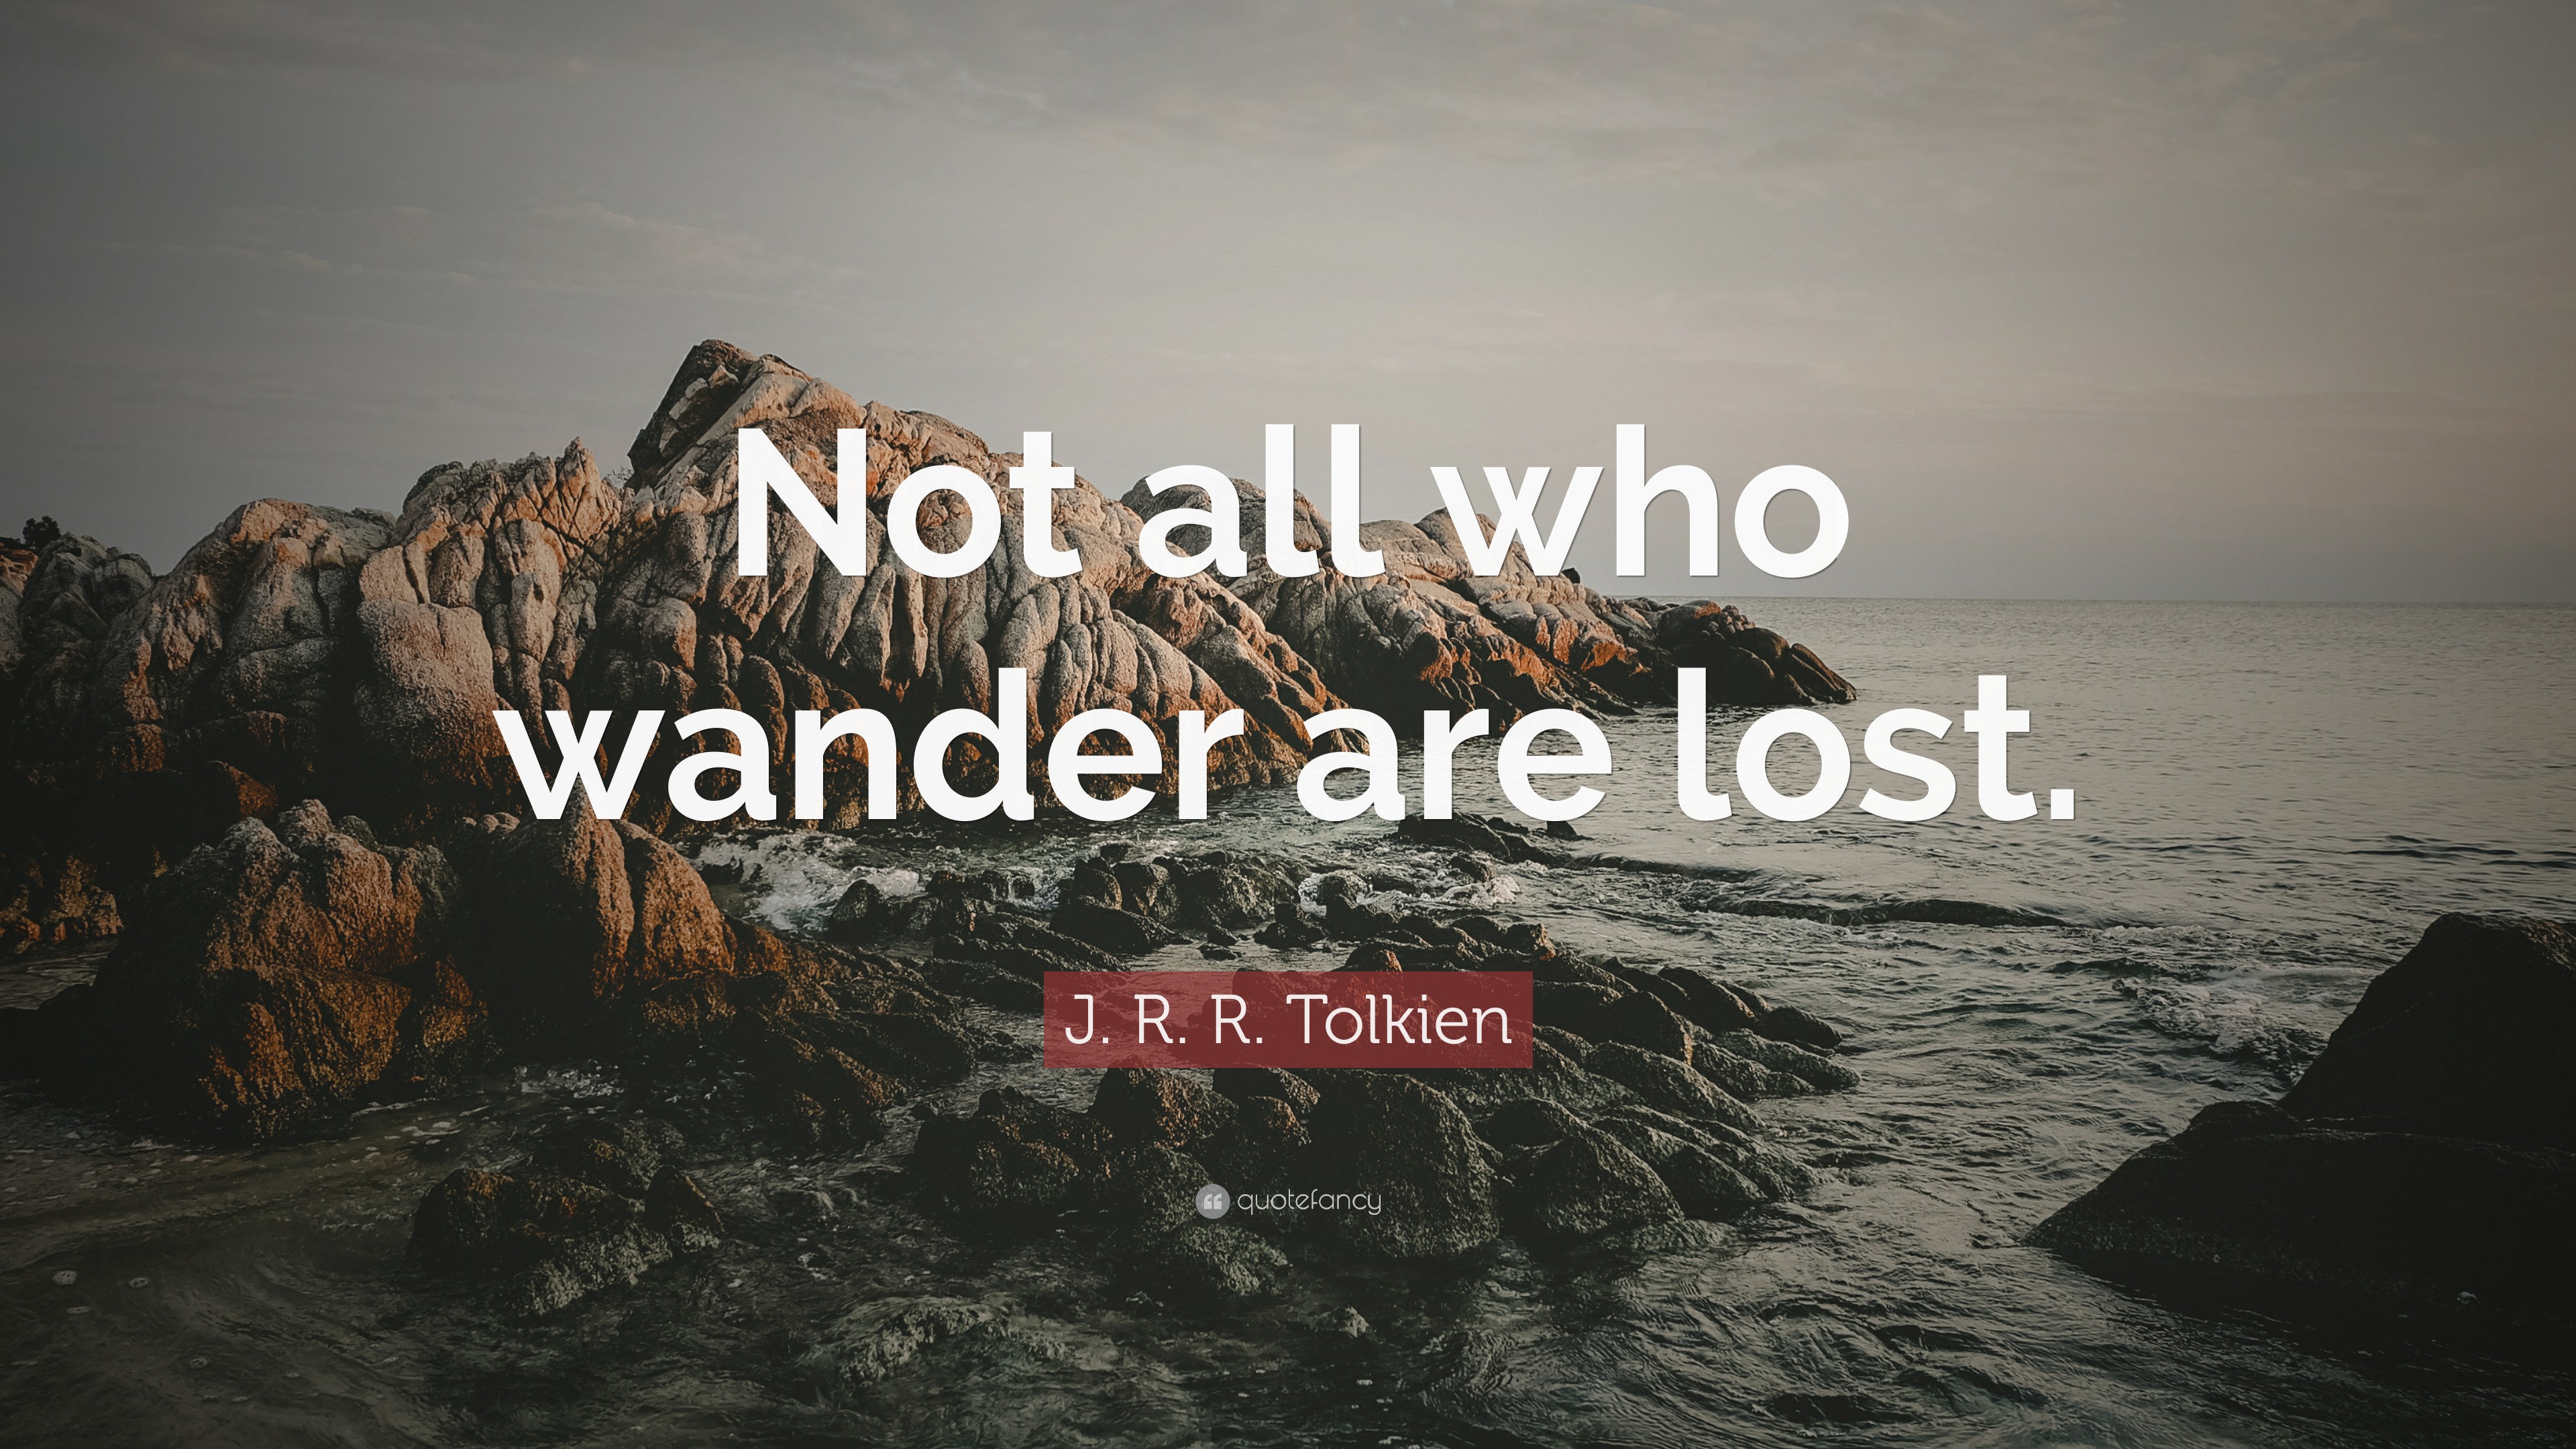 J. R. R. Tolkien Quote: “Not all who wander are lost.”